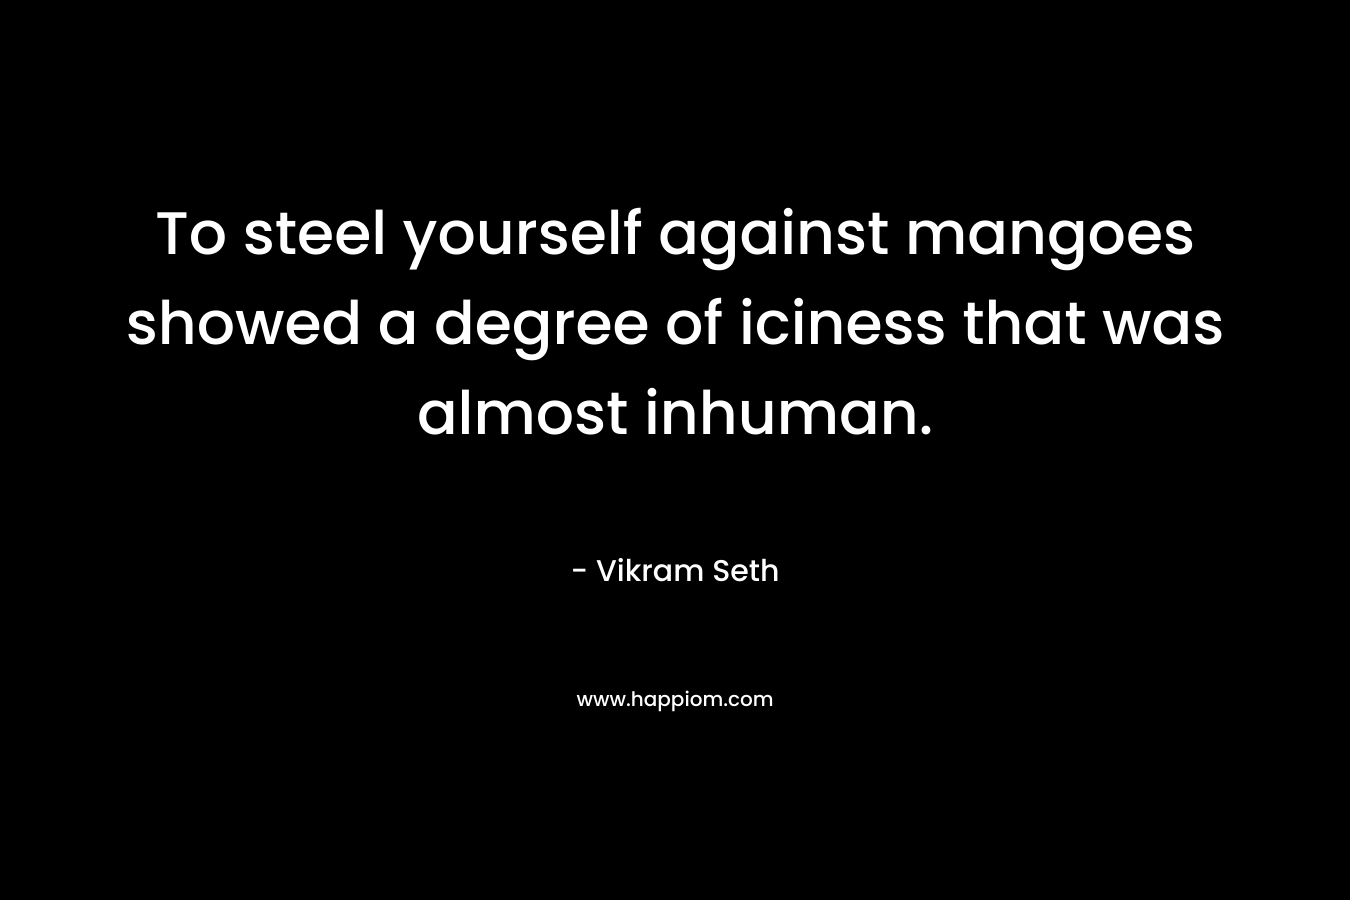 To steel yourself against mangoes showed a degree of iciness that was almost inhuman. – Vikram Seth